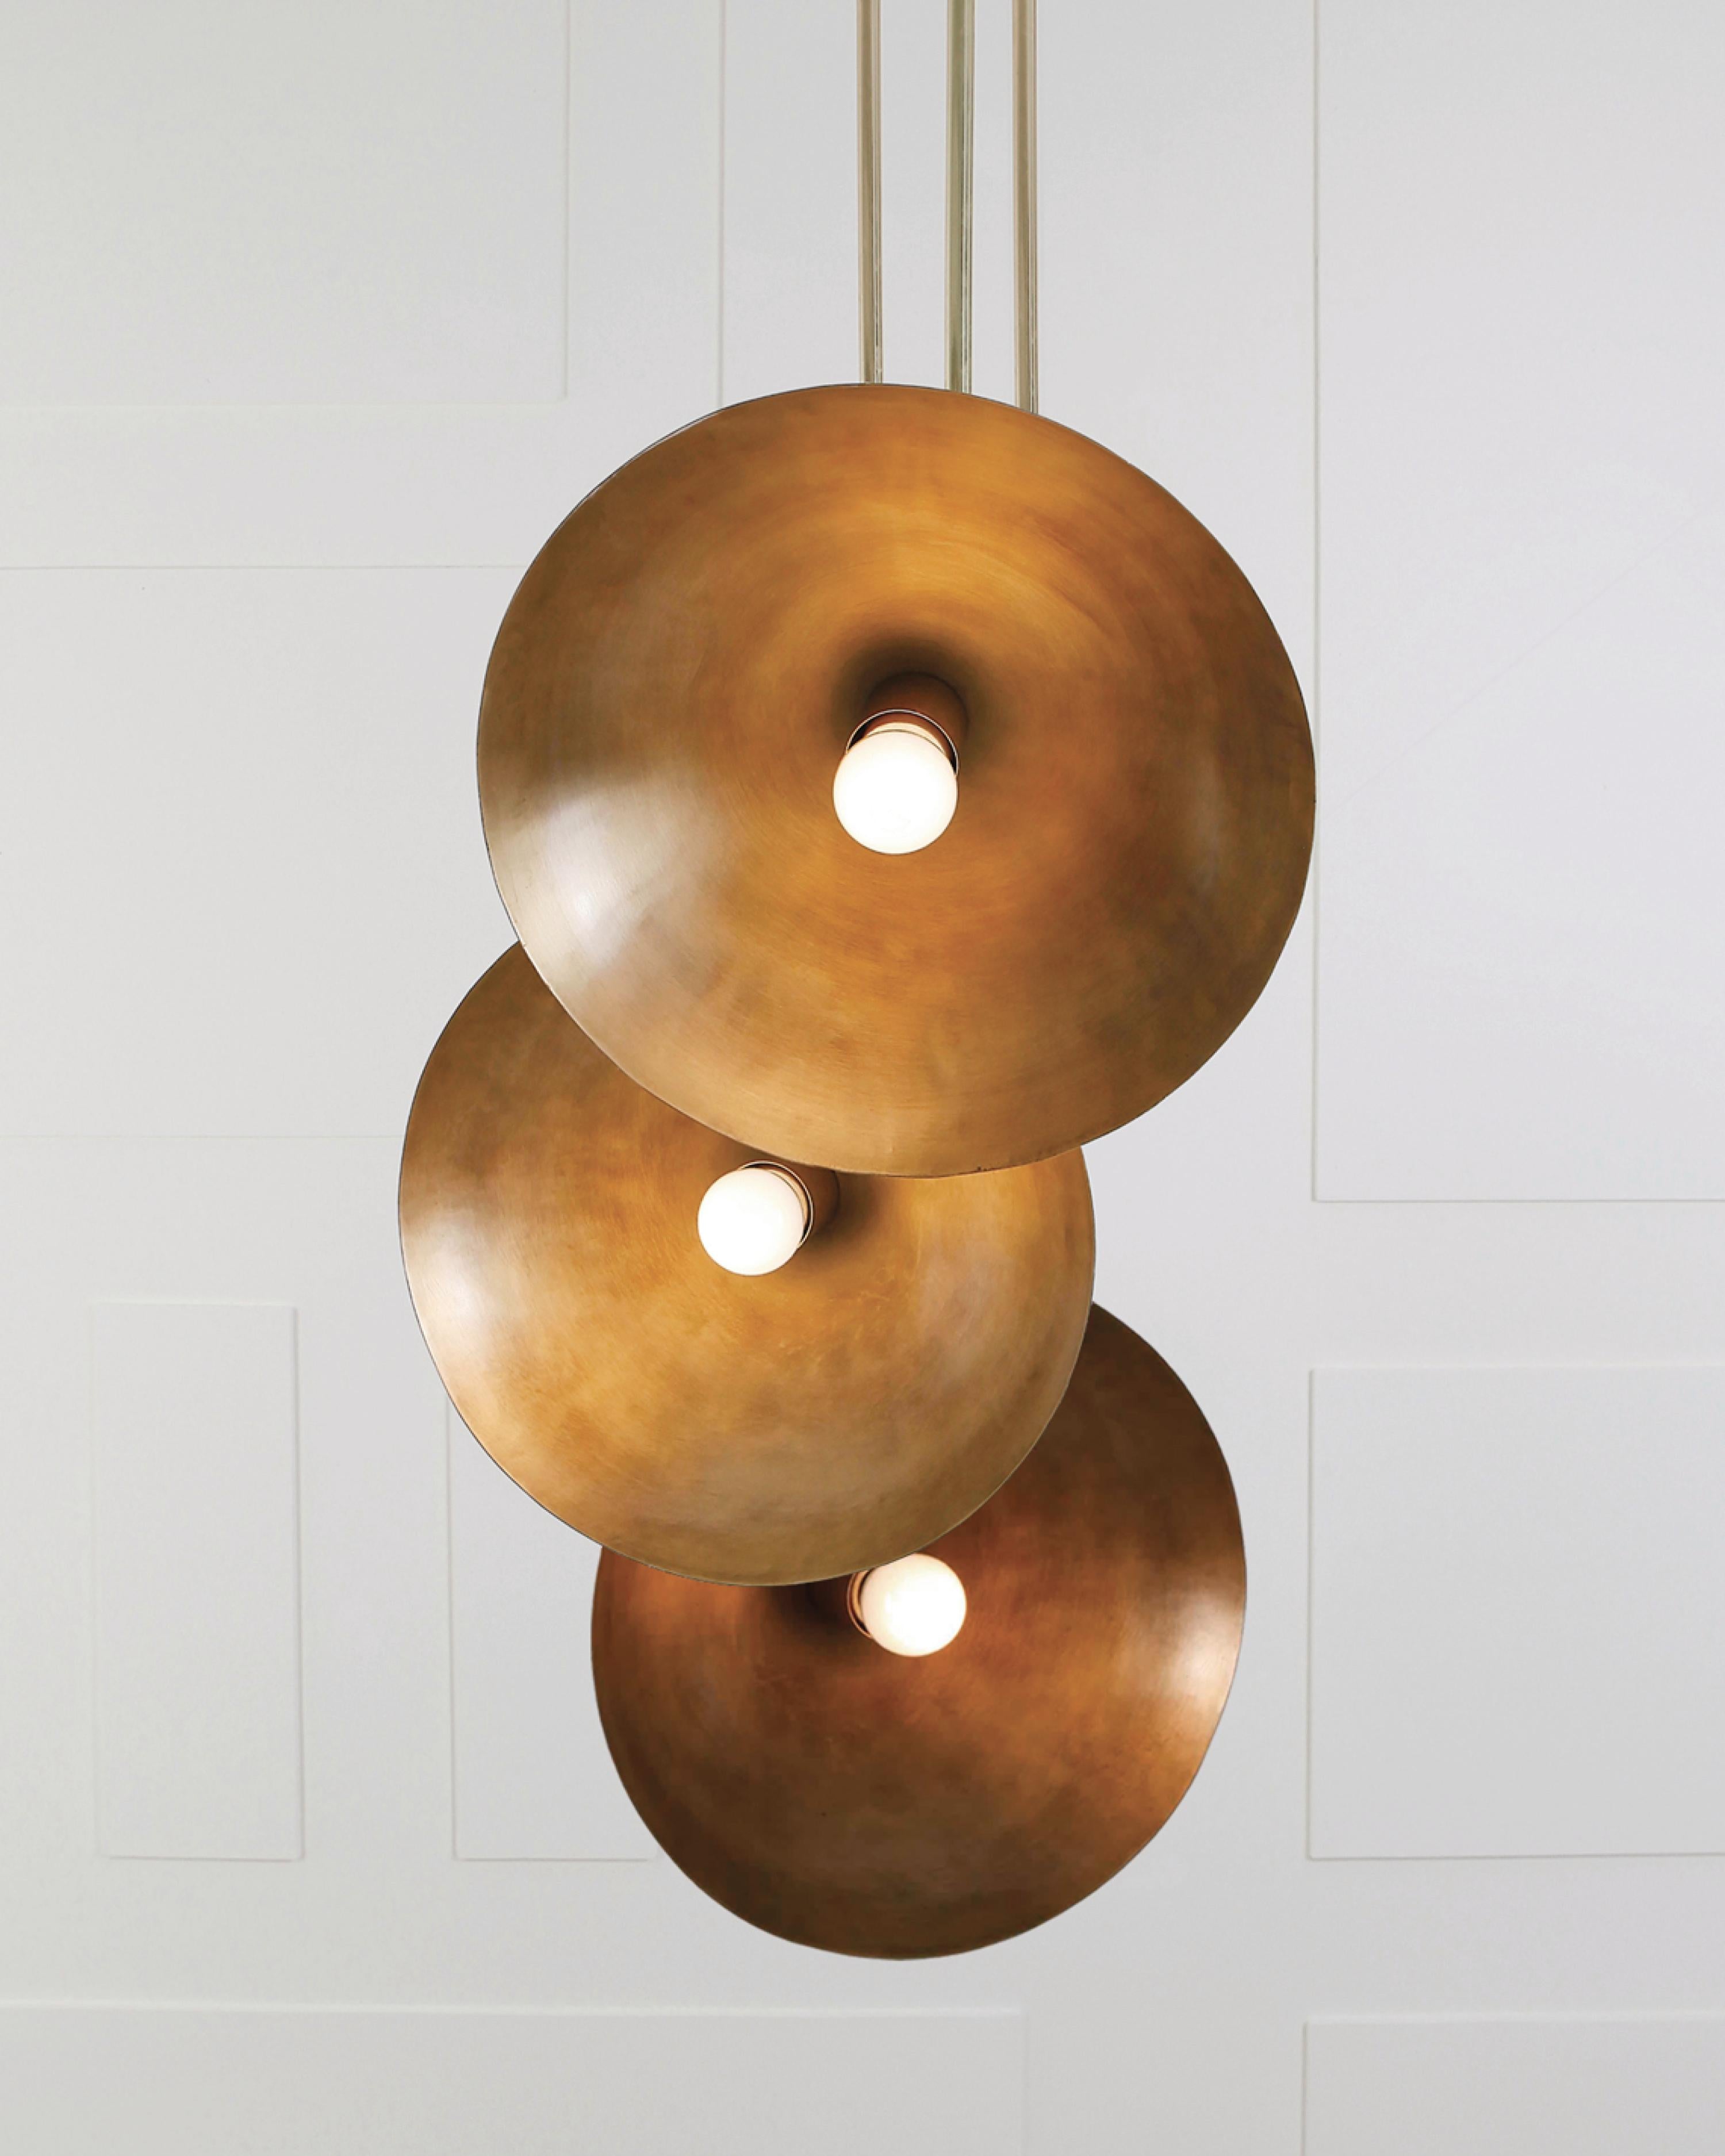 Tango III - Sculpted pendant by Paul Matter
Blackened brass with aged brass details.
Shade in blackened brass (also available in aged brass)
exterior and aged interiors.
Dimensions: H: 58